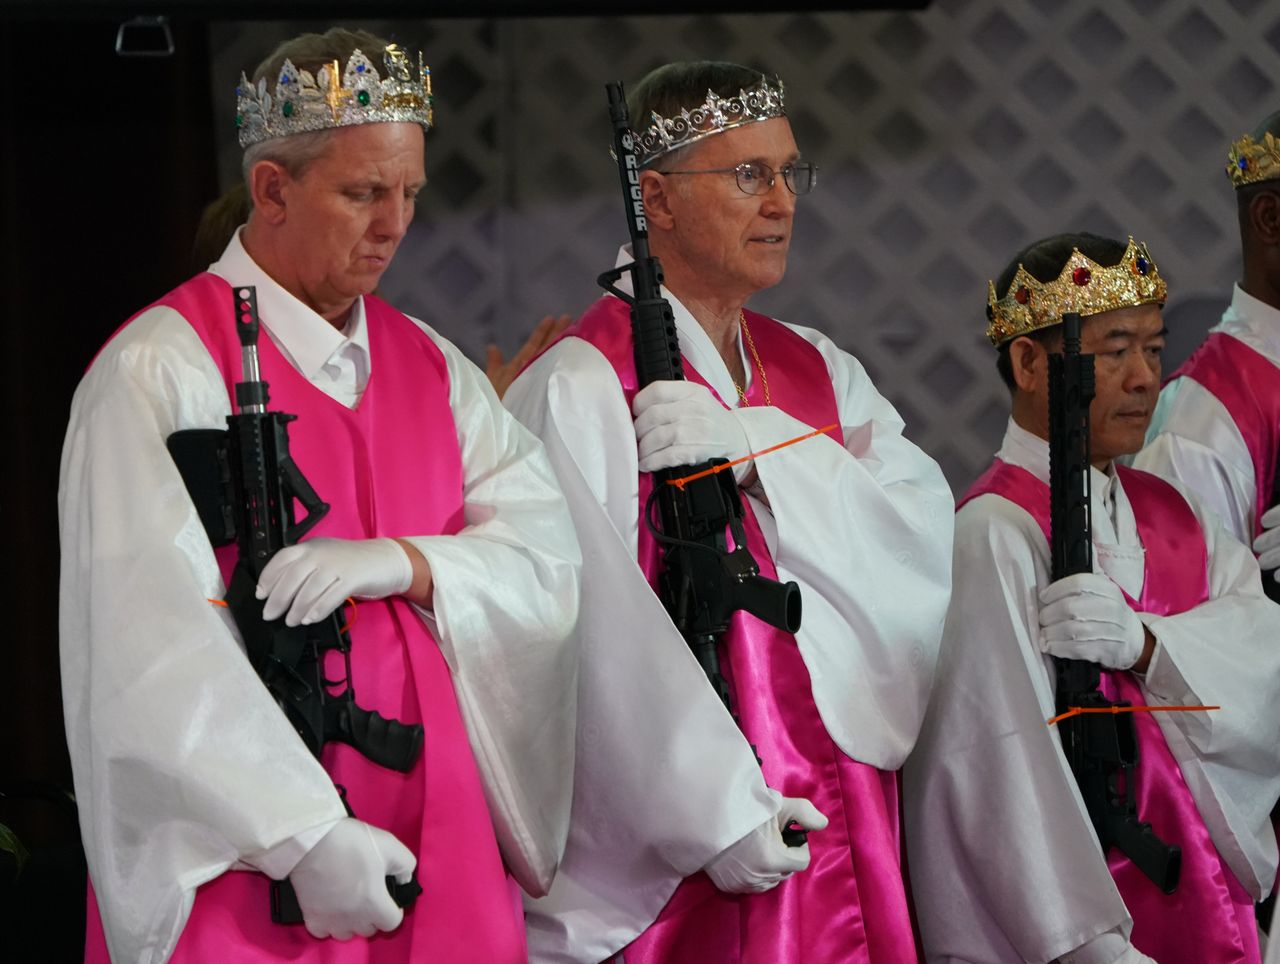 Worshippers at World Peace and Unification Sanctuary hold weapons during their "commitment" service Feb. 28 in Newfoundland, Pennsylvania. Those who embrace guns often are searching for a form of empowerment.